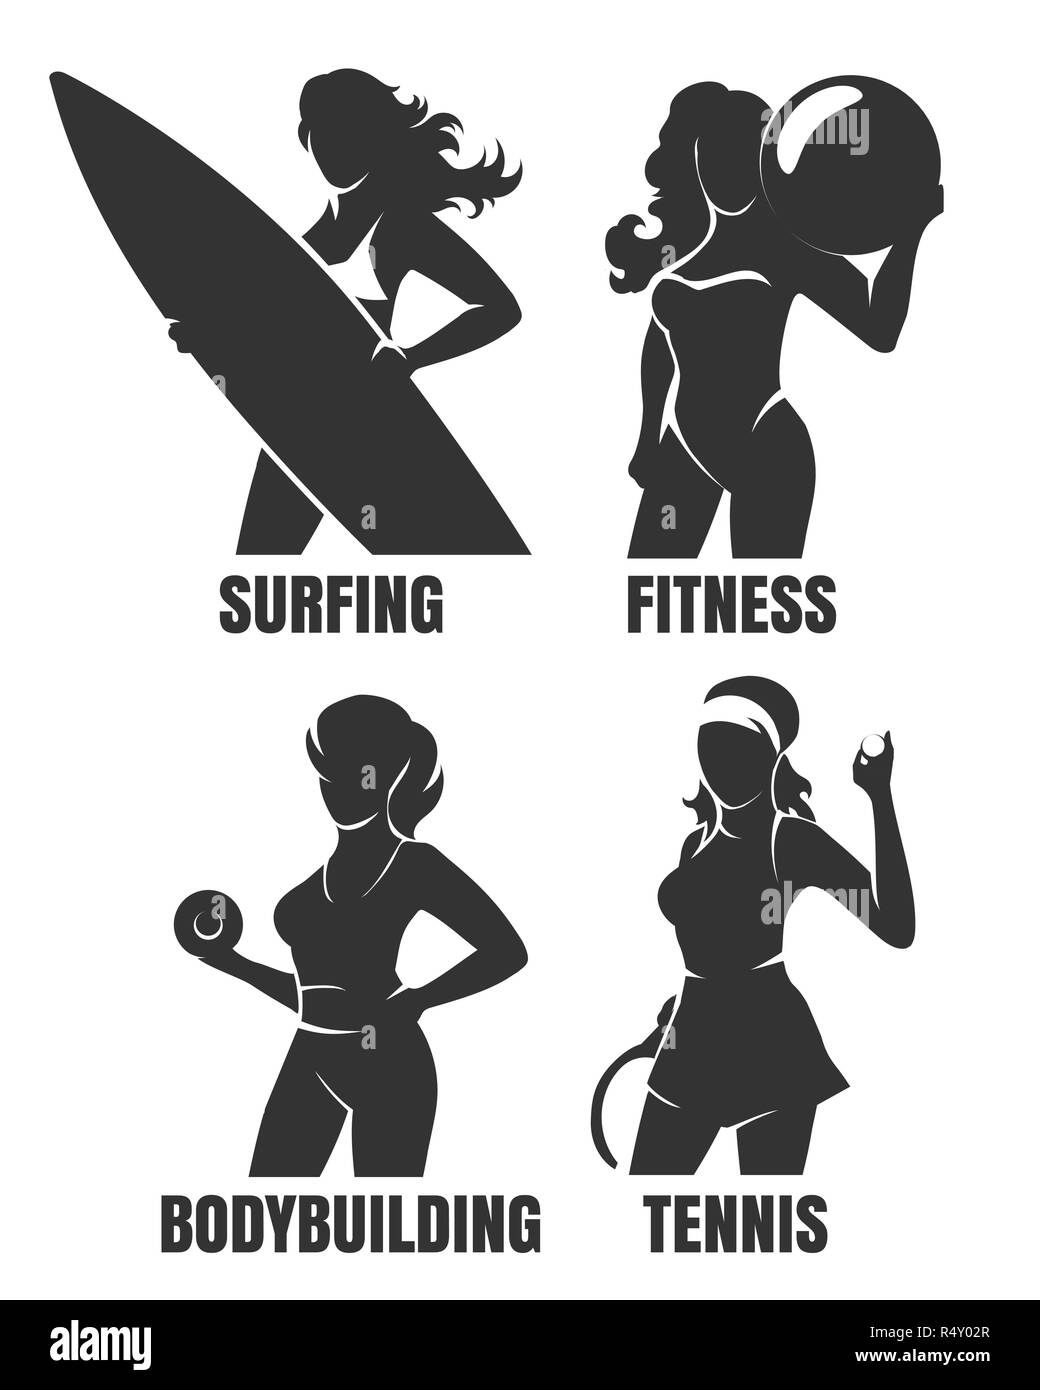 Set of detailed sport woman silhouettes. Fitness, tennis, bodybuilding and surfing women isolated on white. Vector illustartion. Stock Vector